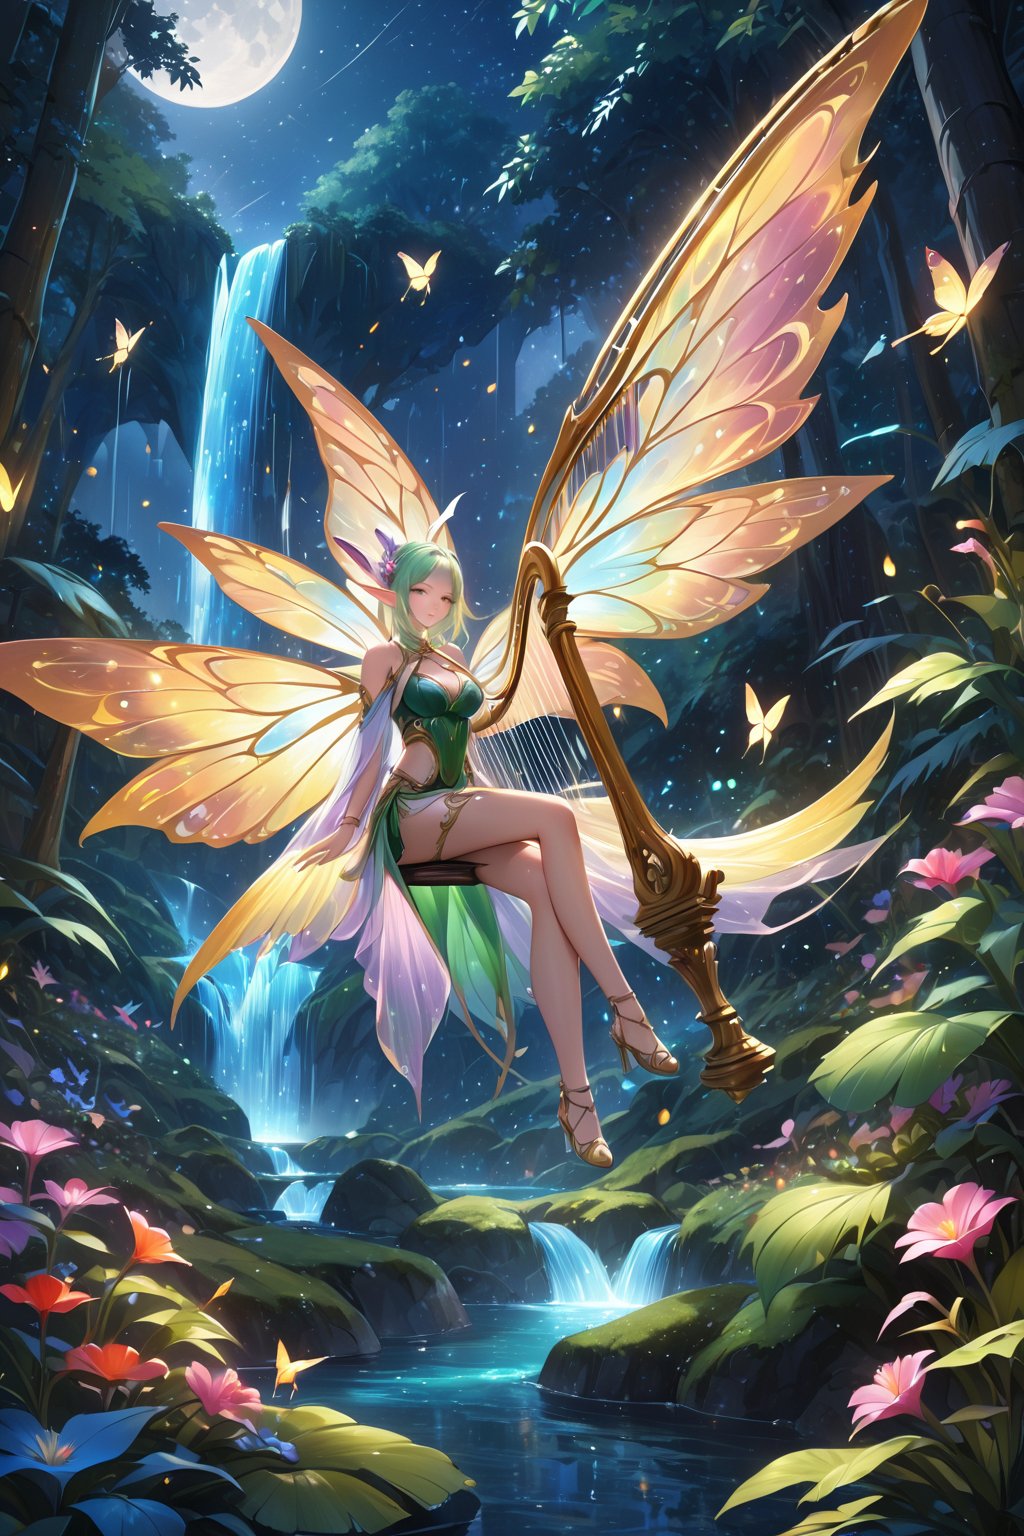 score_9, score_8_up, score_7_up, score_6_up, 
1 girl, beautiful elf girl, elf wings, Play the harp, Magic Forest, Night sky, moon, fireflies, waterfalls, magic elves, 
(Masterpiece, Best Quality, 8k:1.2), (Ultra-Detailed, Highres, Extremely Detailed, Absurdres, Incredibly Absurdres, Huge Filesize:1.1), (Photorealistic:1.3), By Futurevolab, Portrait, Ultra-Realistic Illustration, Digital Painting. ,Strong Backlit Particles,Butterfly Style